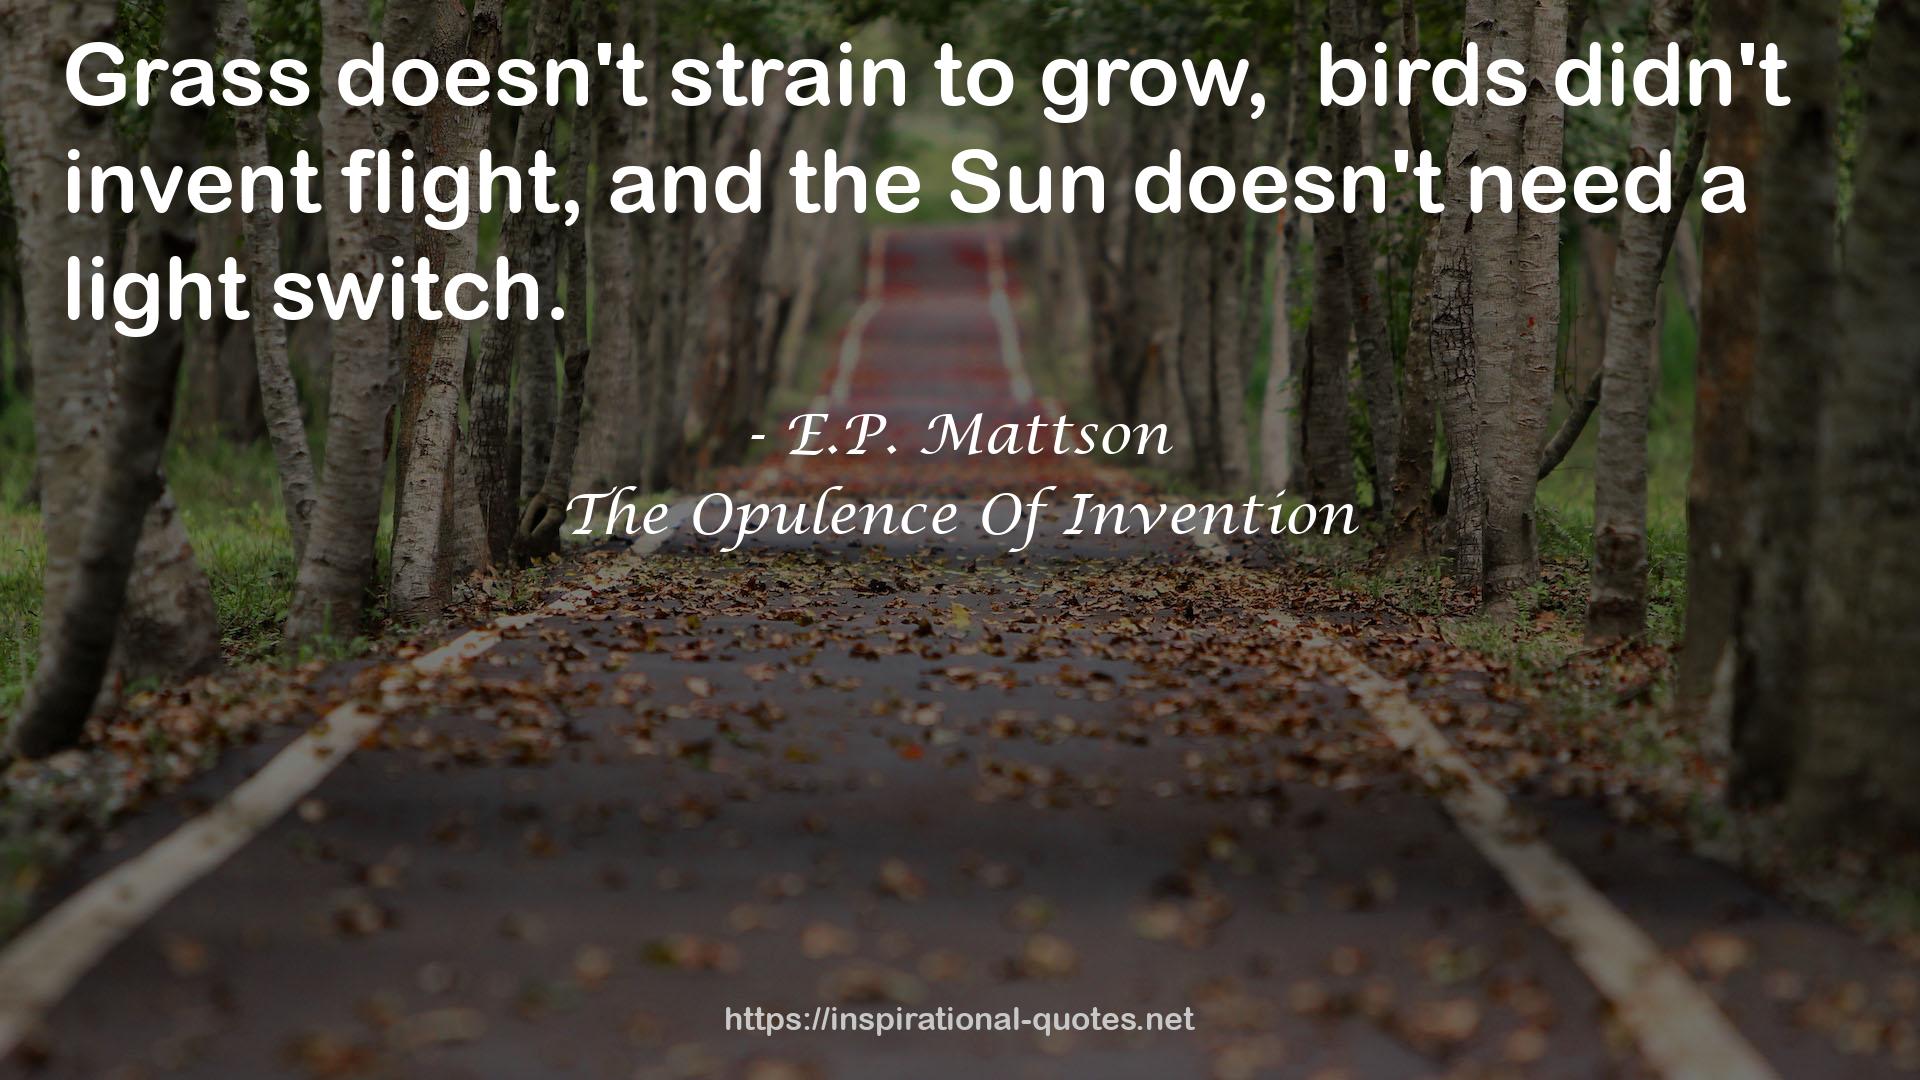 The Opulence Of Invention QUOTES